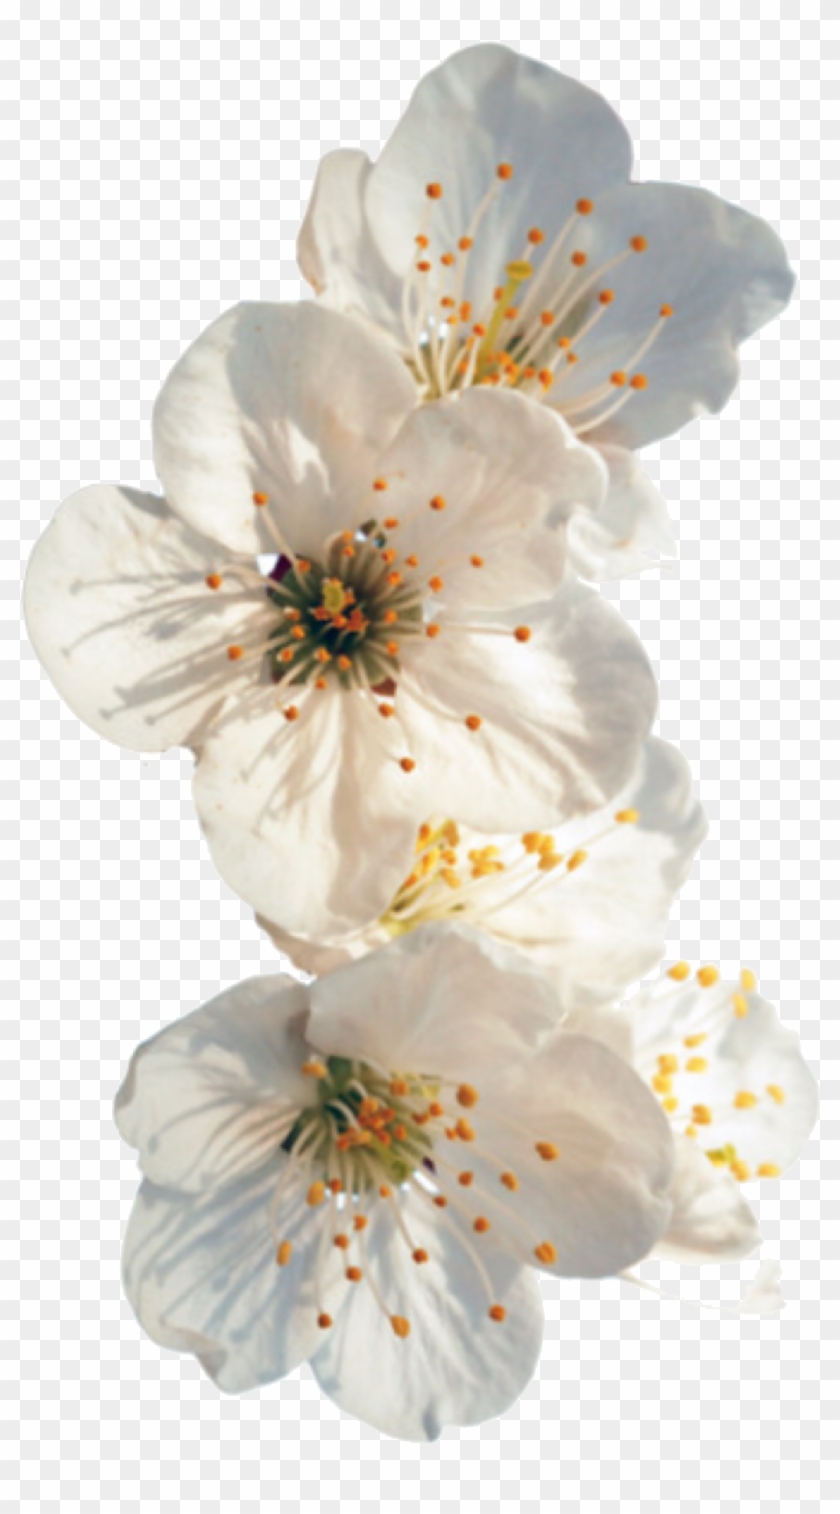 Everything Is Gonna Be Ok - White Flowers Tumblr Png, Transparent Png ...